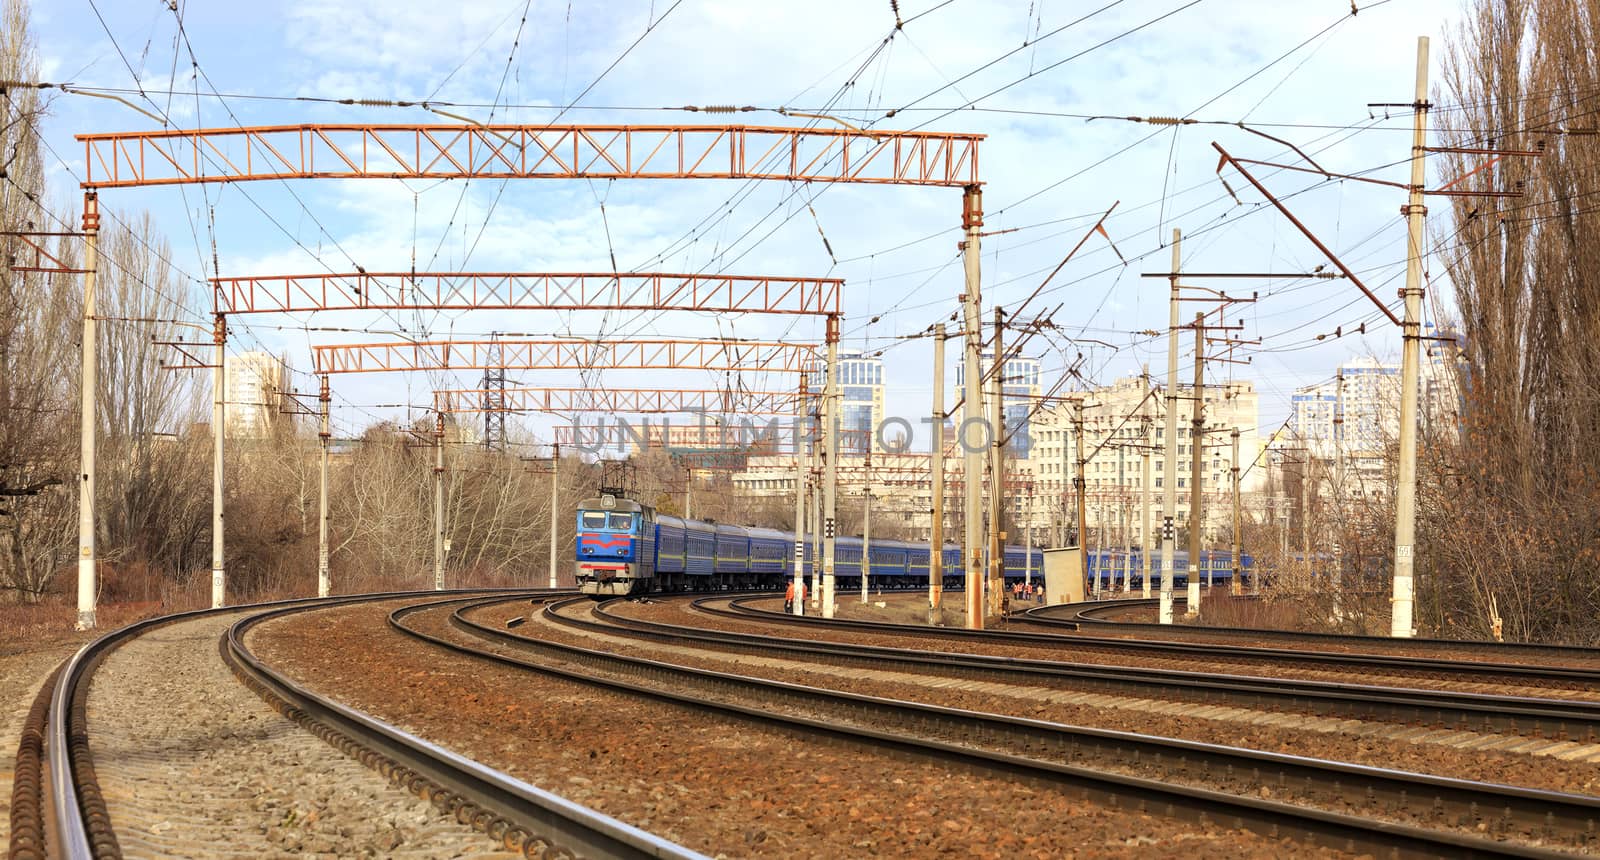 Passenger train cars of the train ride on the railway tracks in the background of the cityscape by Sergii